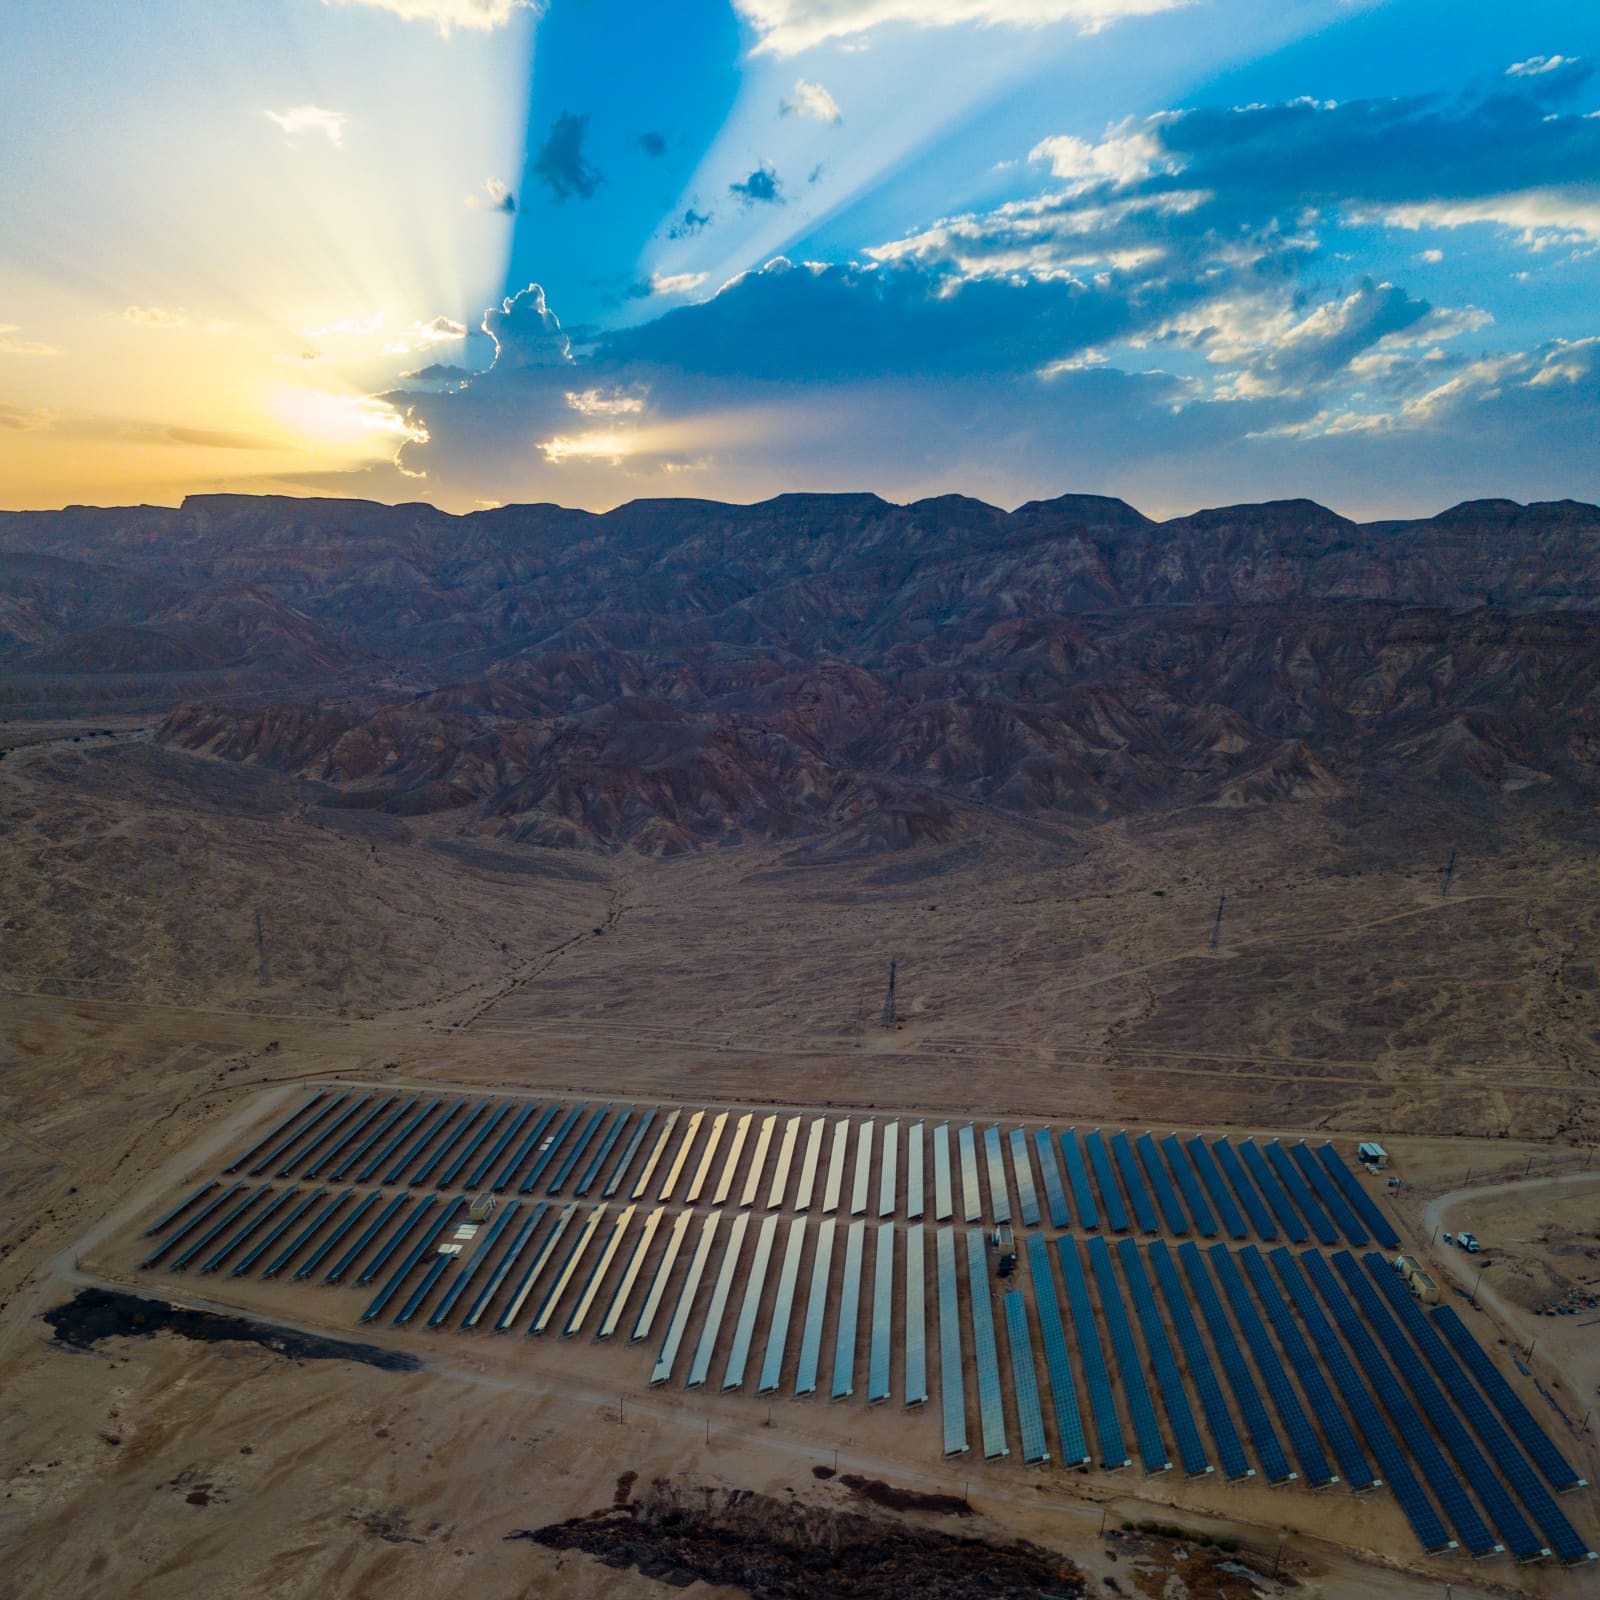 The solar farm in the Arava where the study was conducted. Photo by Jonathan D. Muller